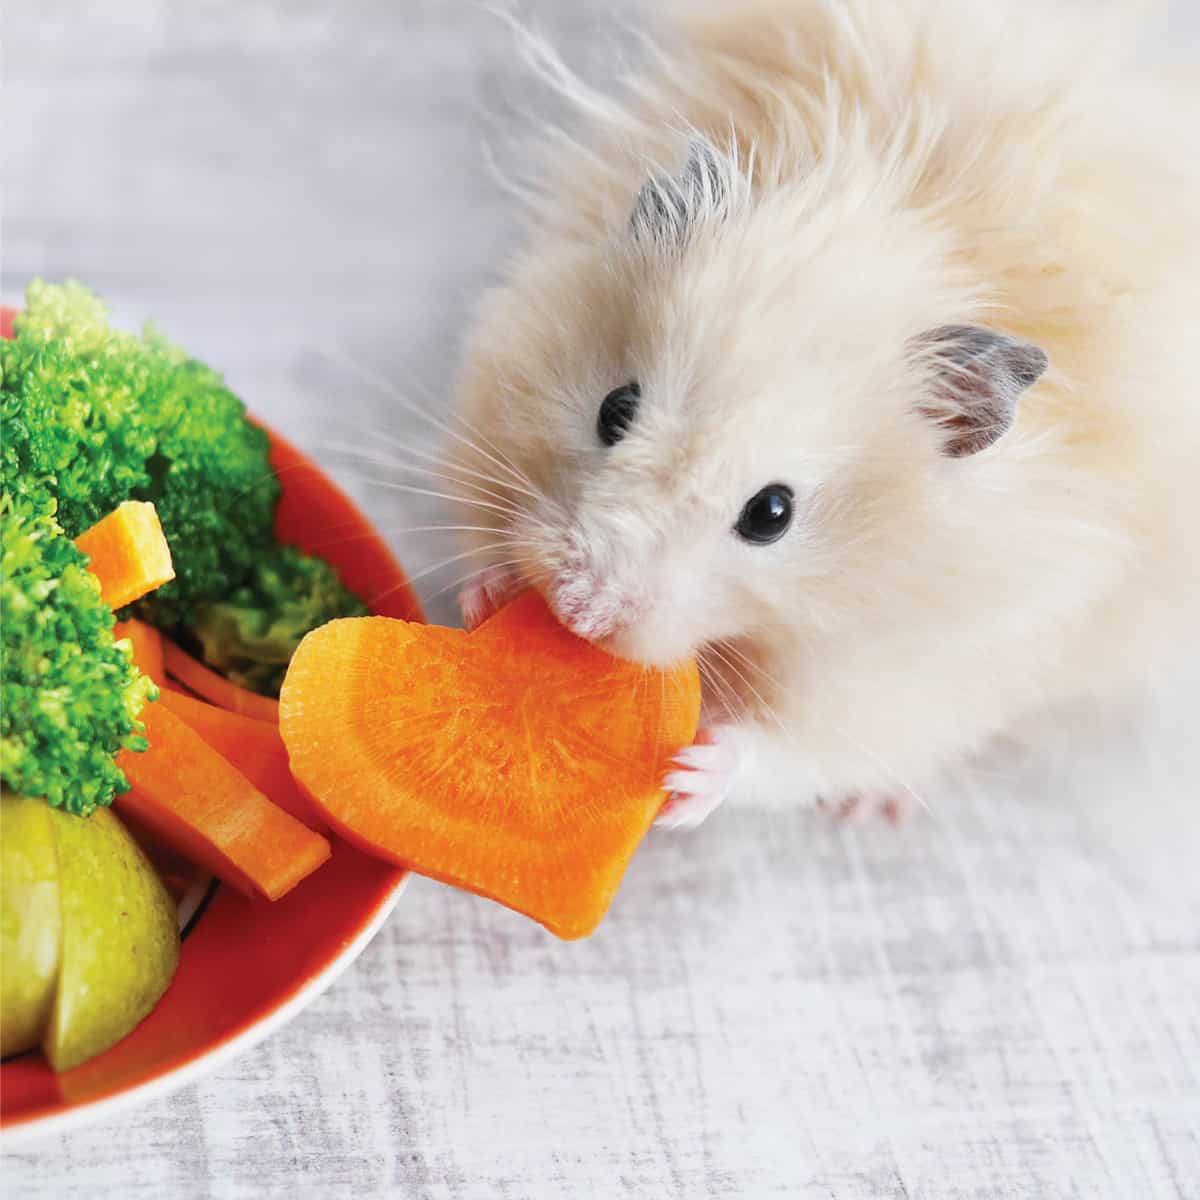 what fruits can a hamster eat